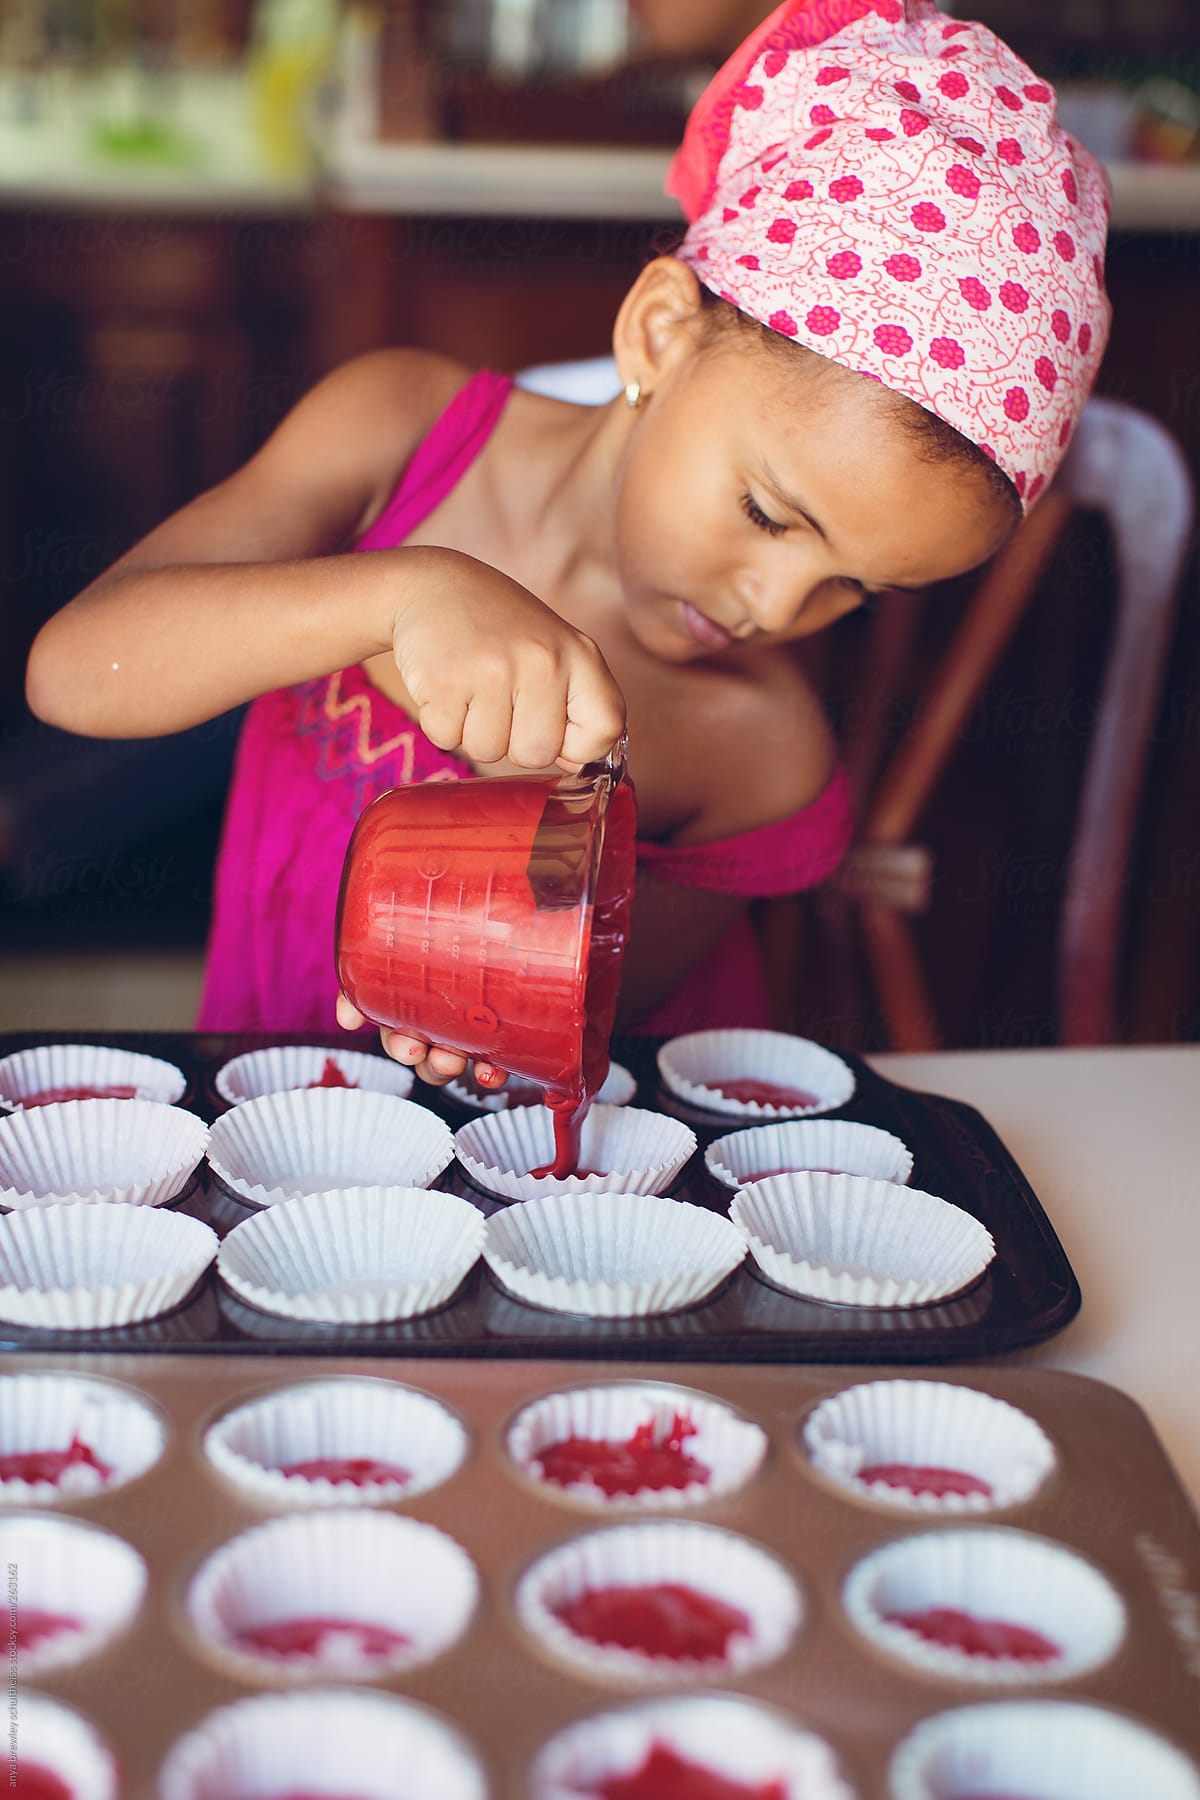 Young child pouring cupcake batter into a baking pan